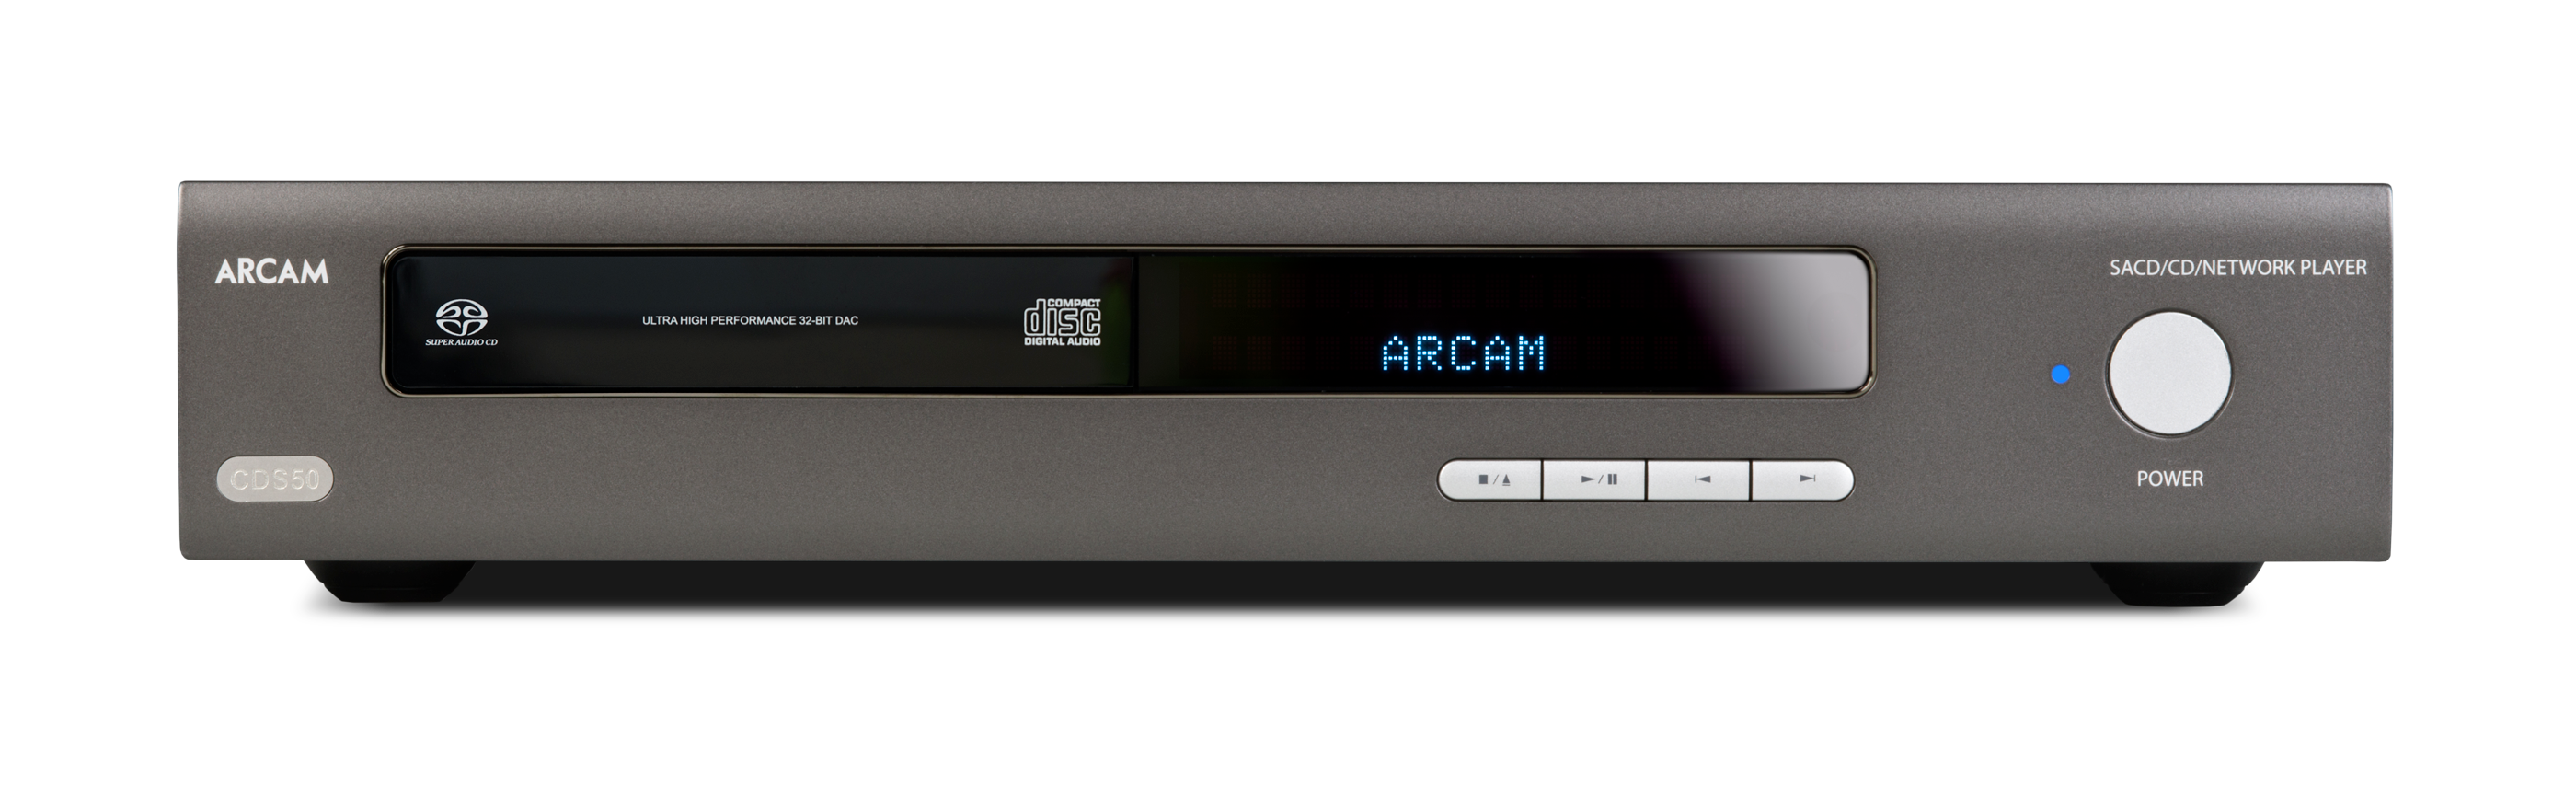 https://www.amplitude.be/wp-content/uploads/2020/05/arcam-cds50-front-sacd.png